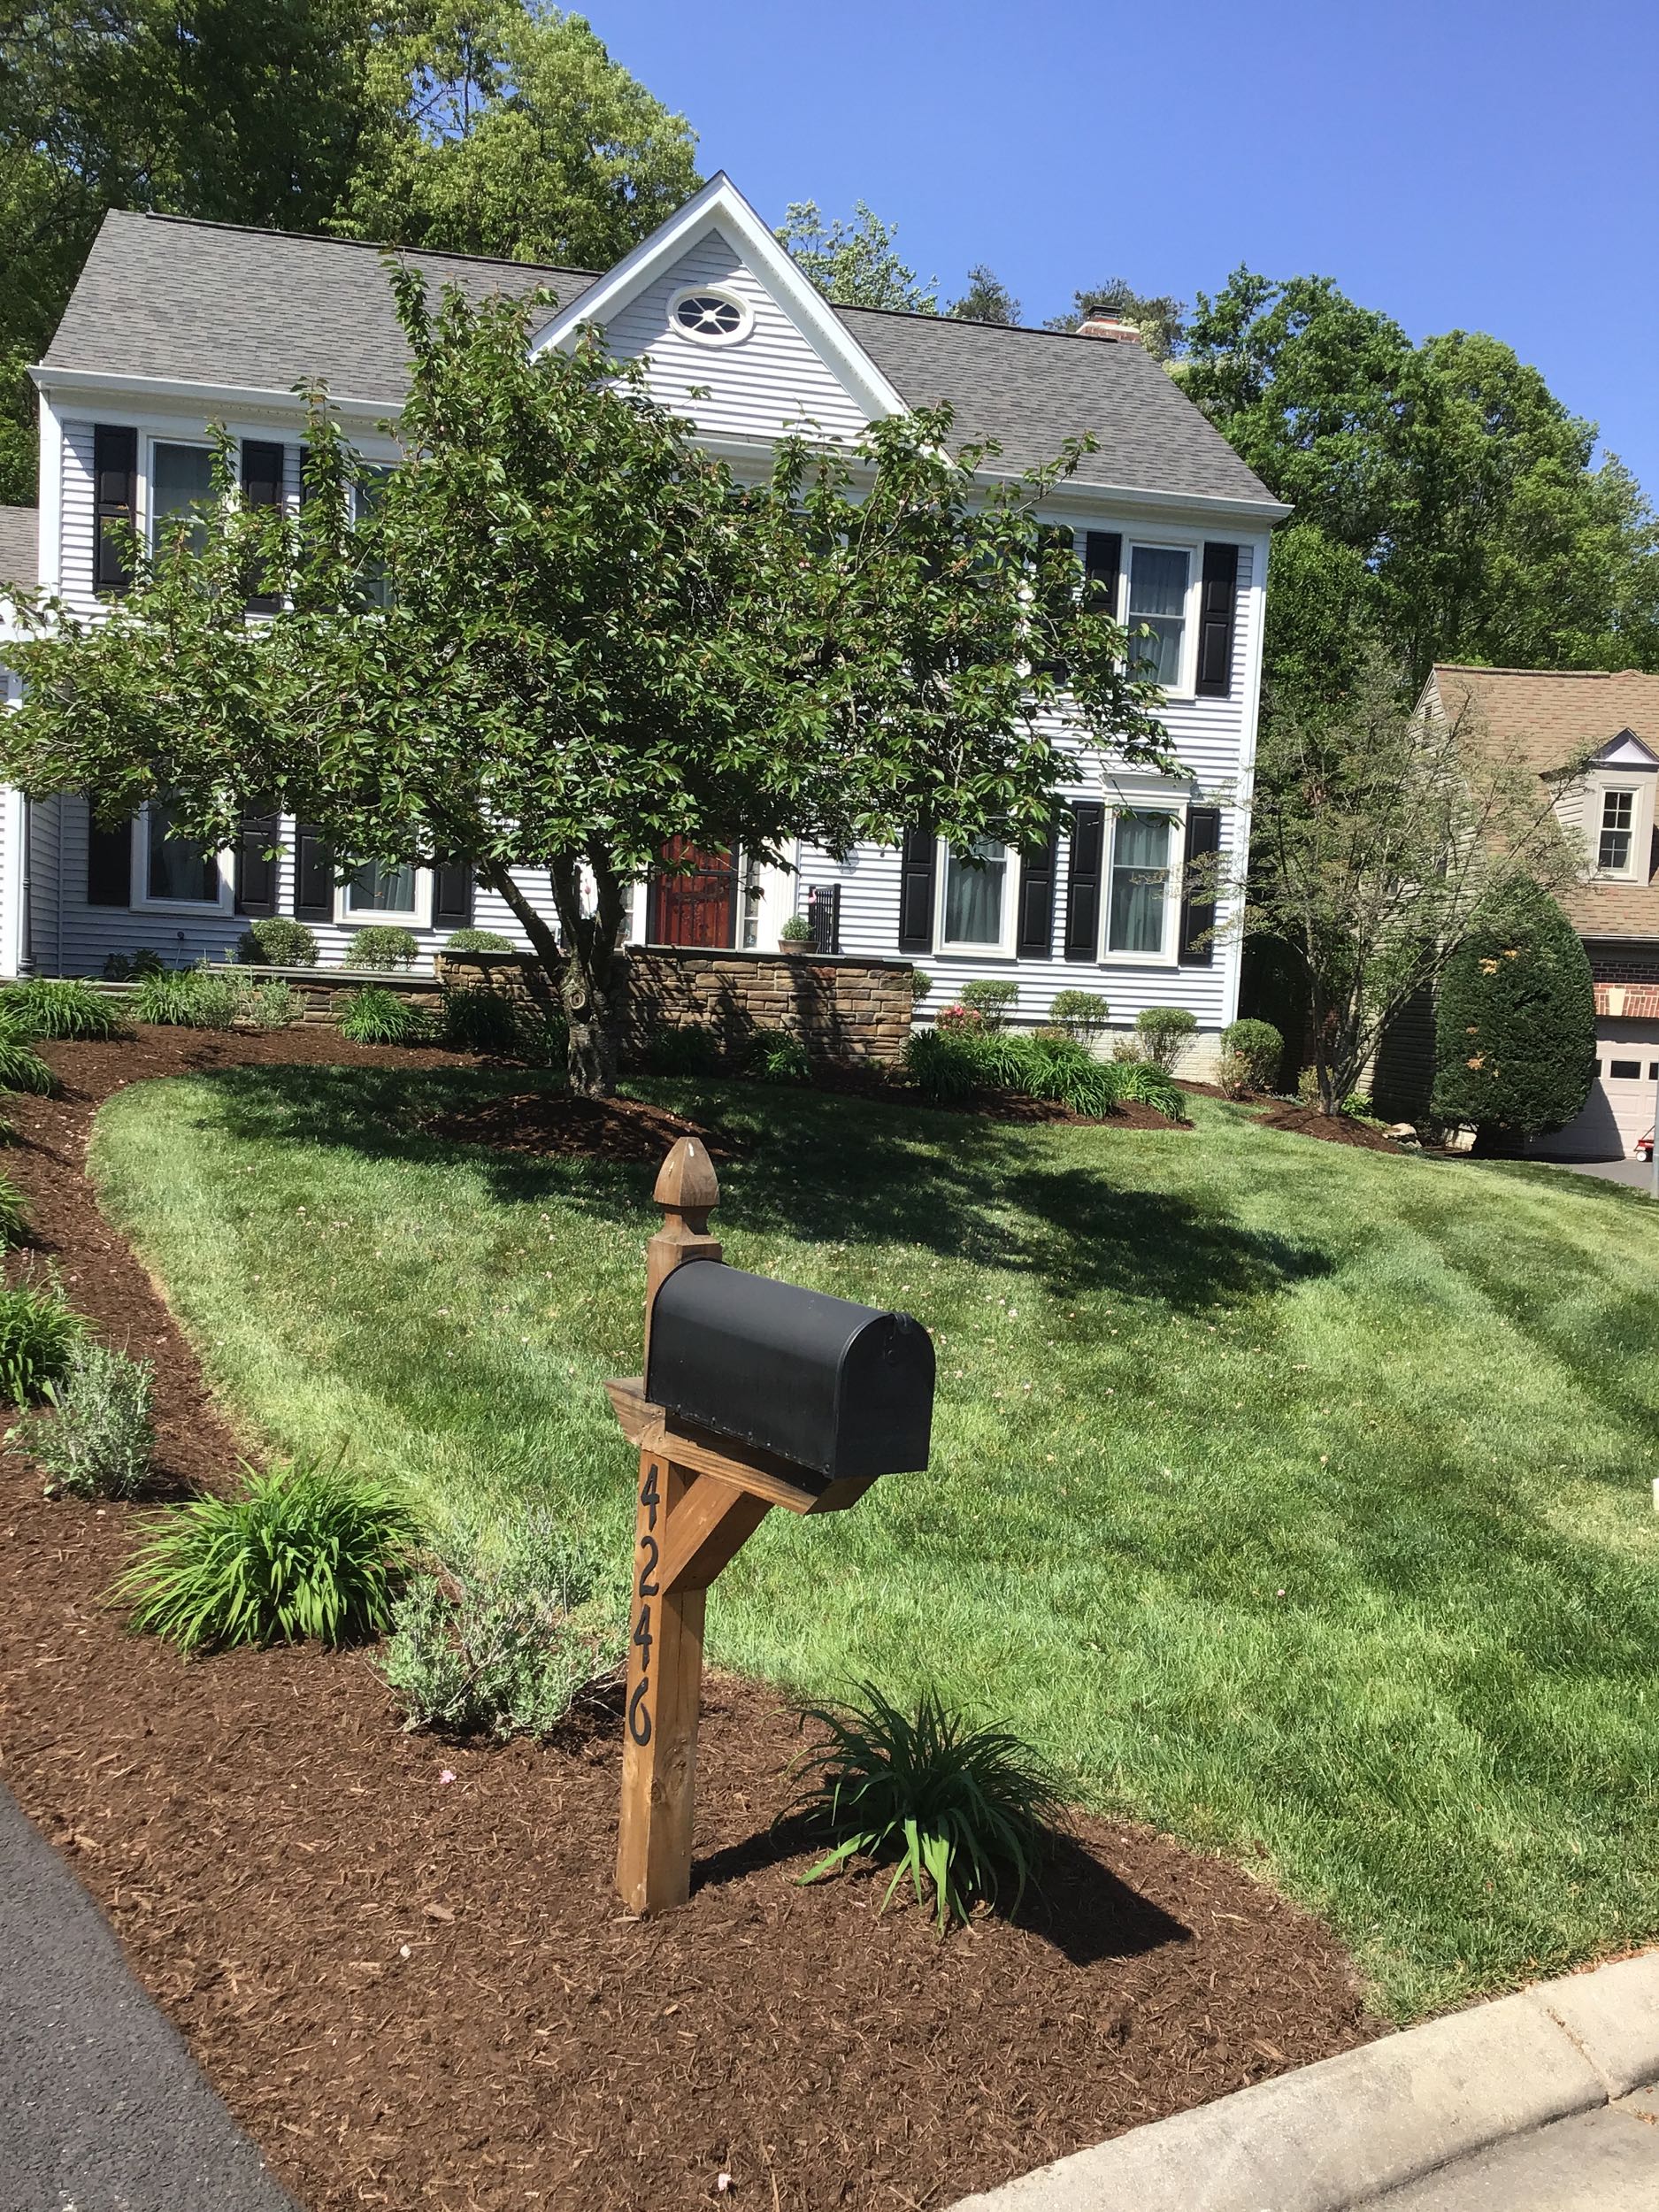 The Top Ten Factors To Consider When Looking for Landscaping Near Me